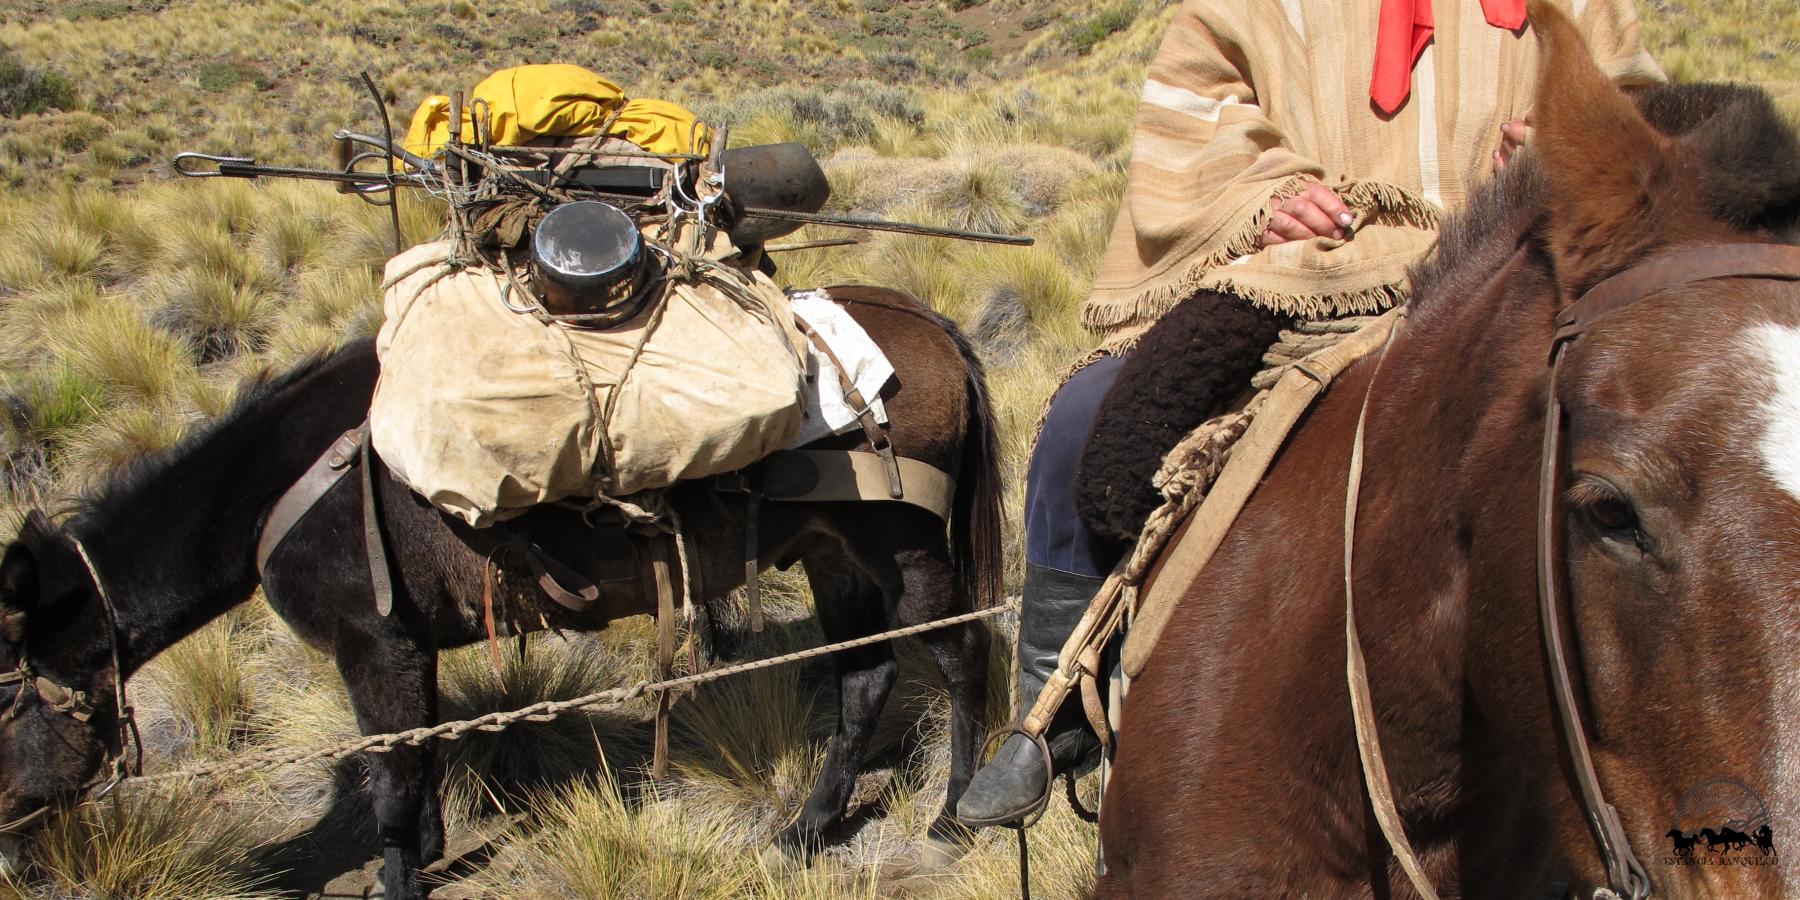 Argentine gaucho on horse leading his loaded pack mule